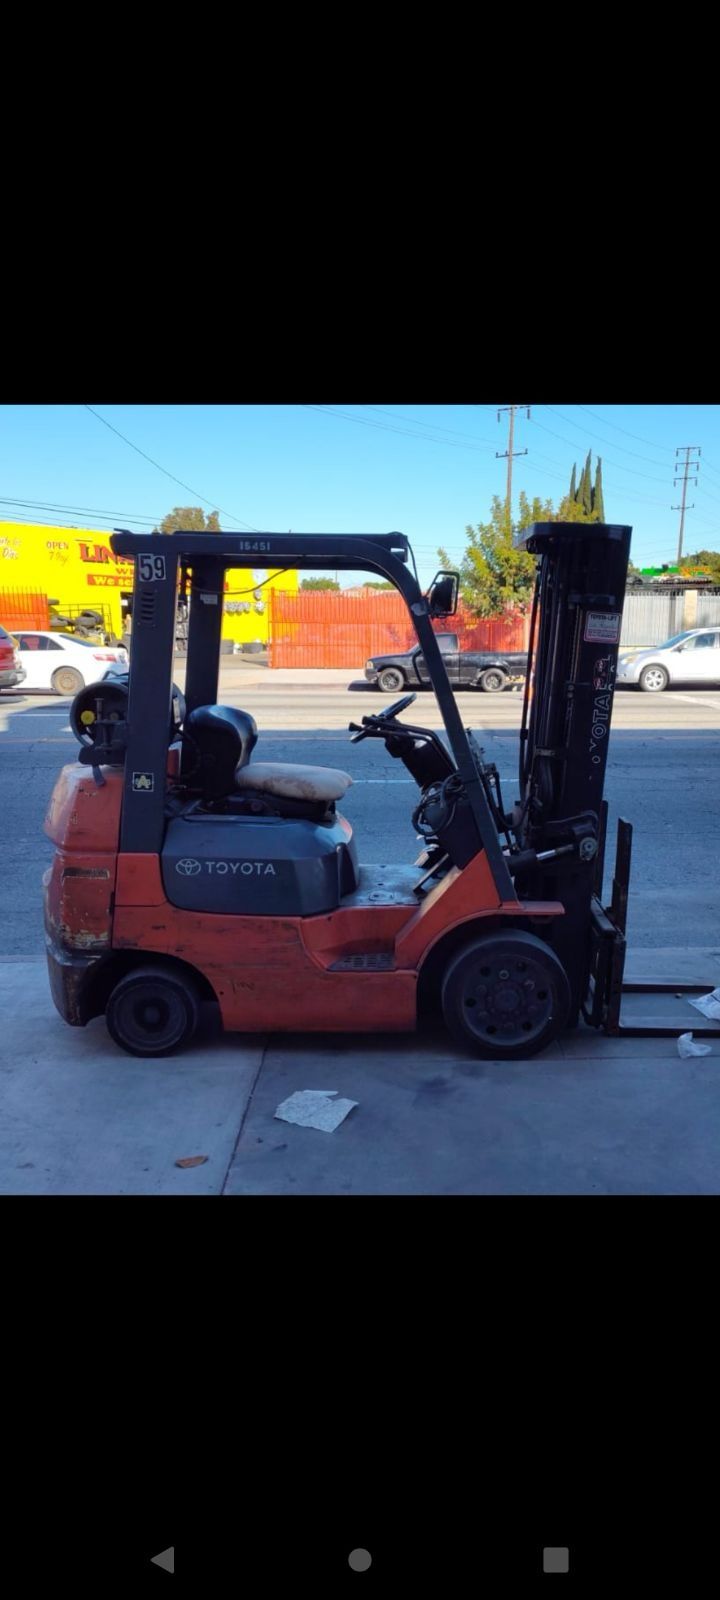 Attention information about the whereabouts of this forklift reward on hand